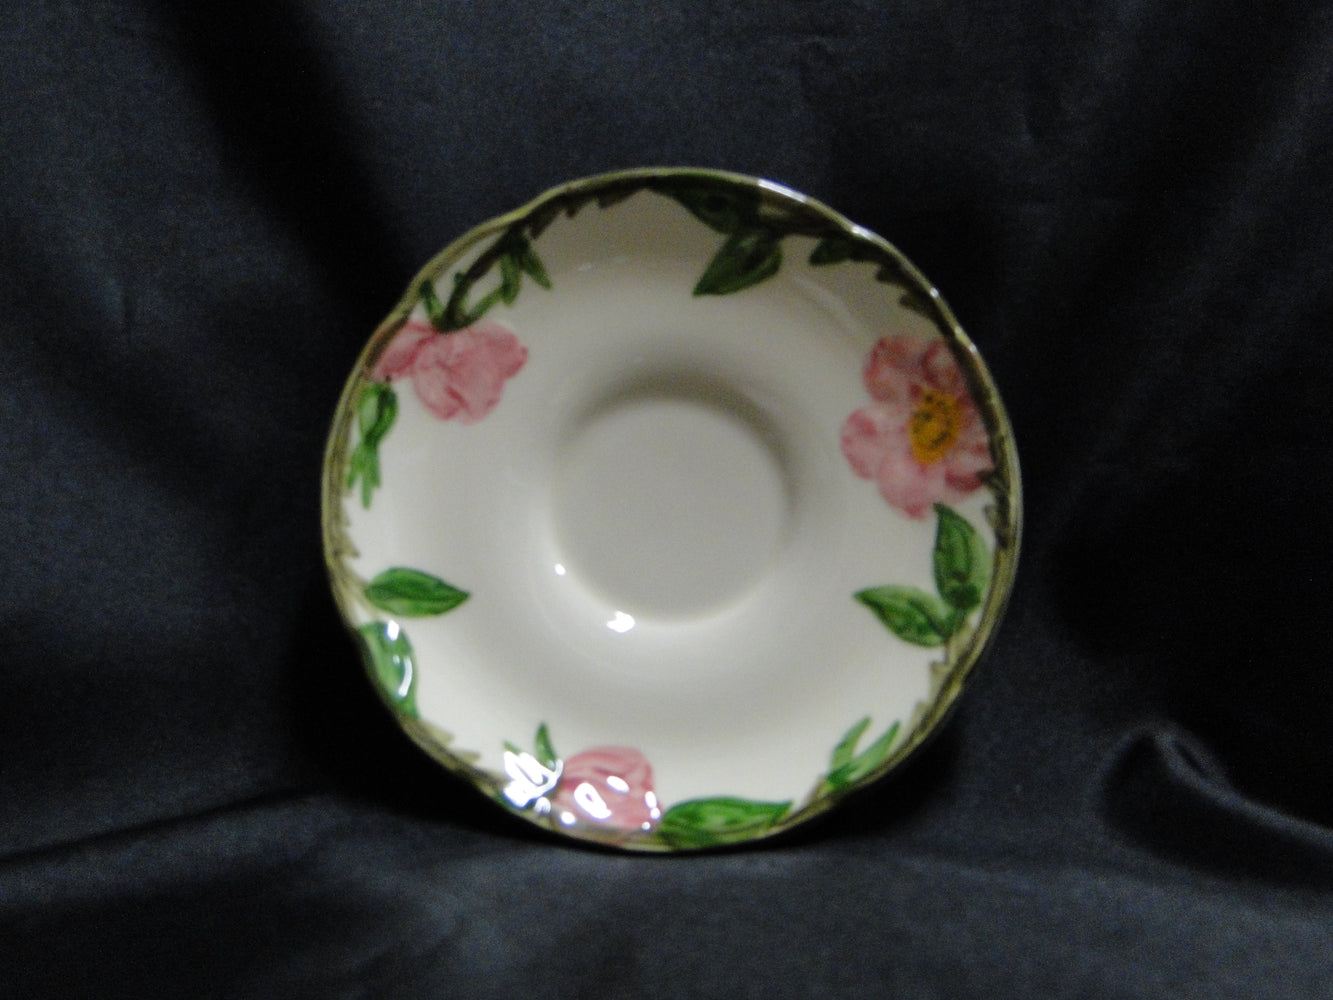 Franciscan Desert Rose, USA: 5 3/4" Saucer (s) Only, No Cup